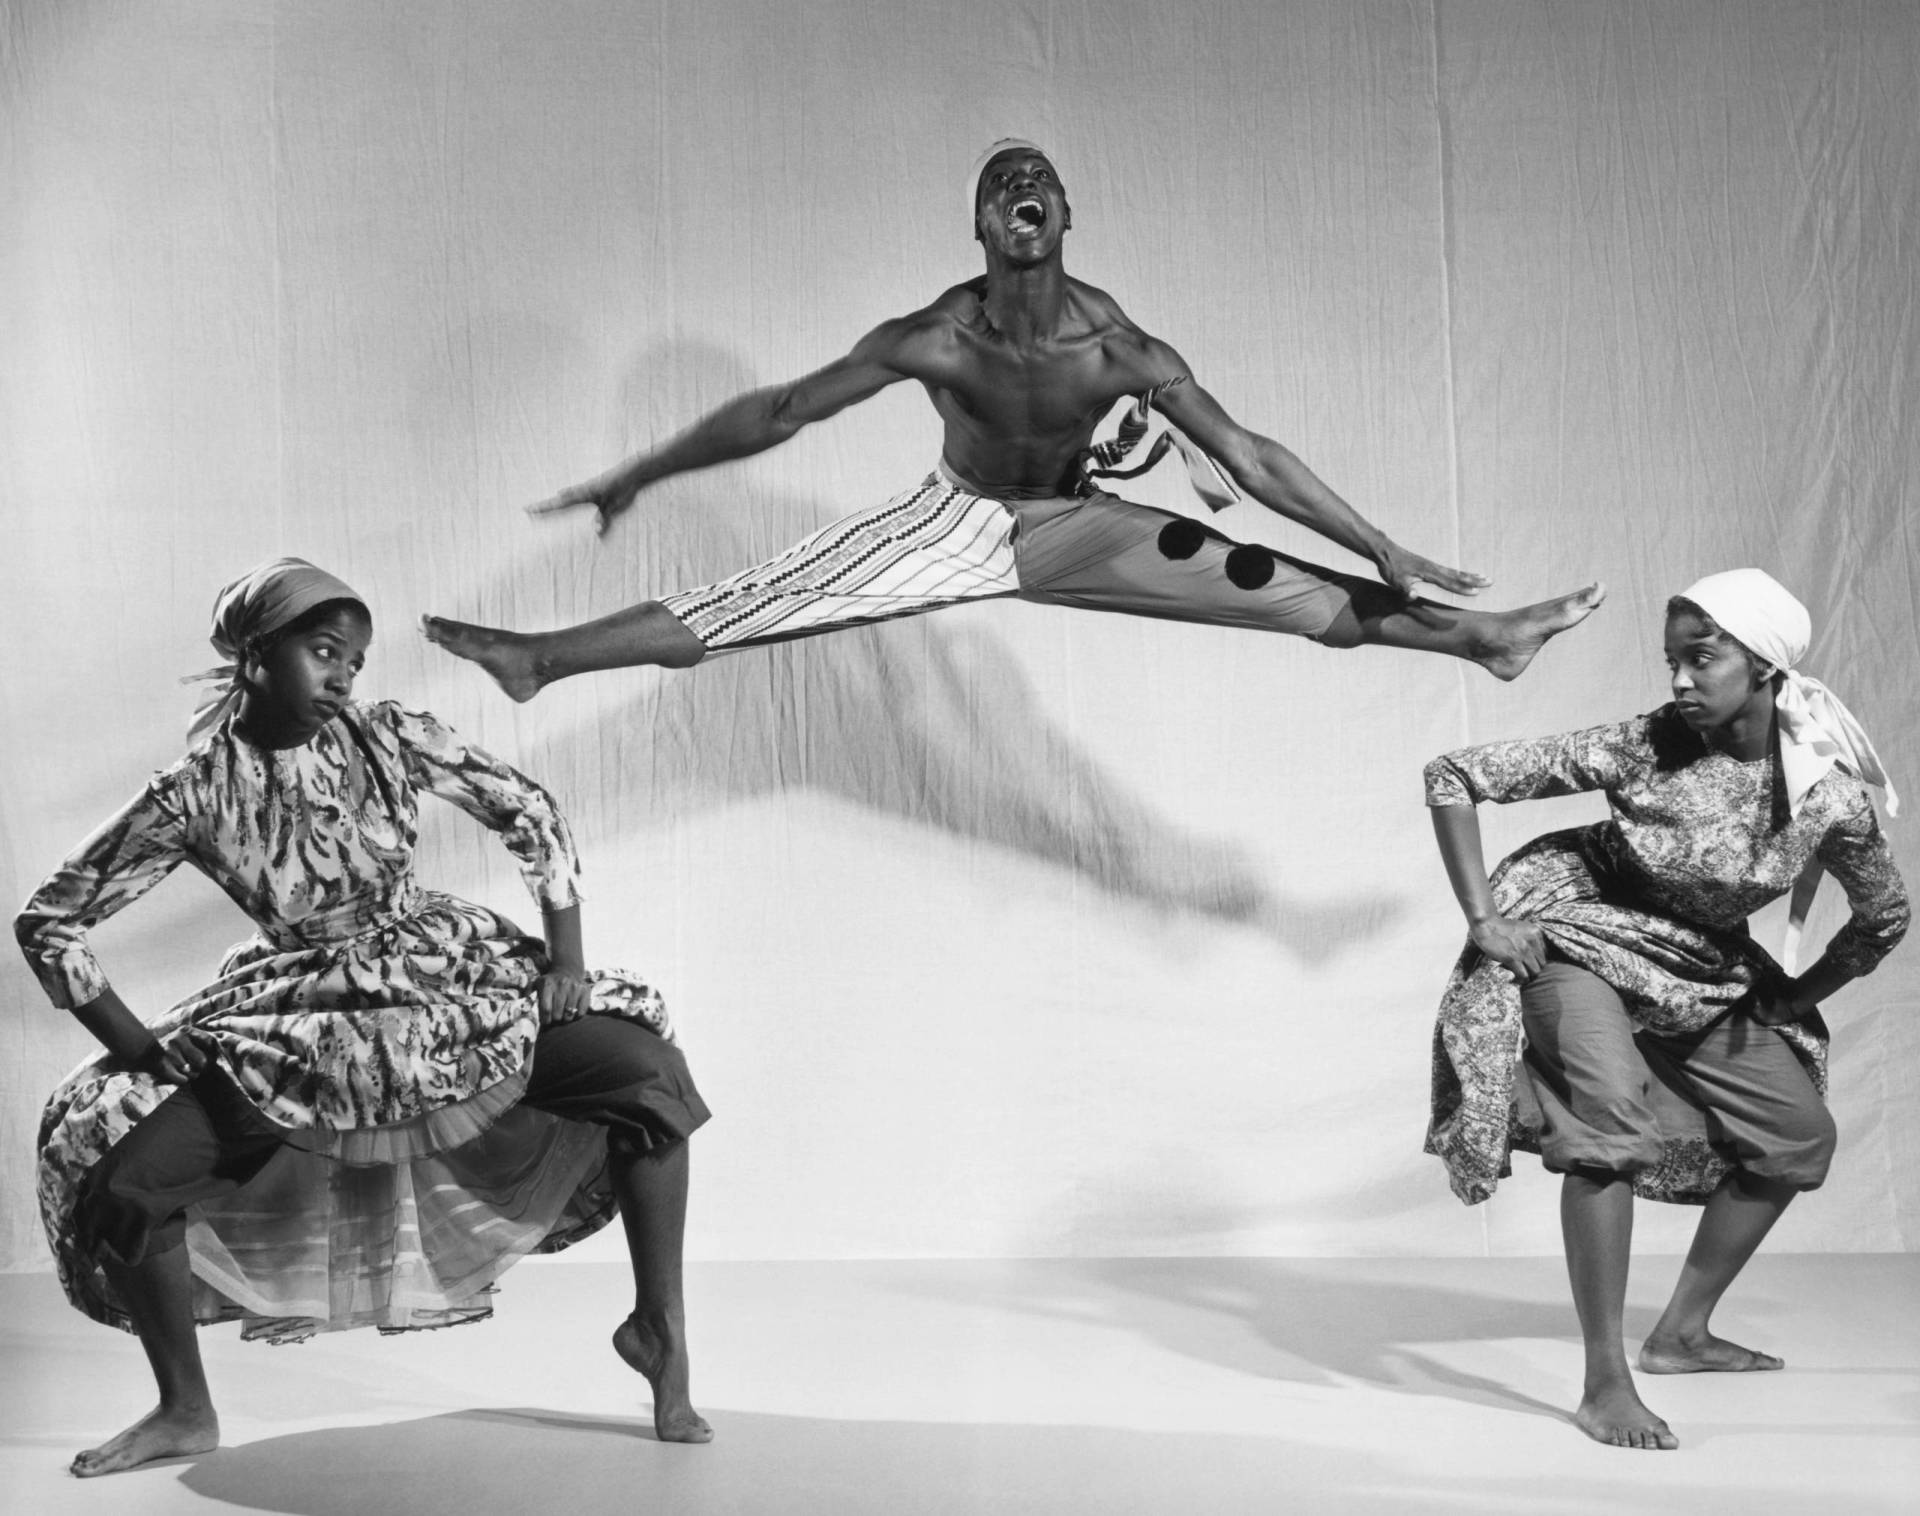 A Black male dancer does the splits in mid-air, while two Black women dance either side of him.